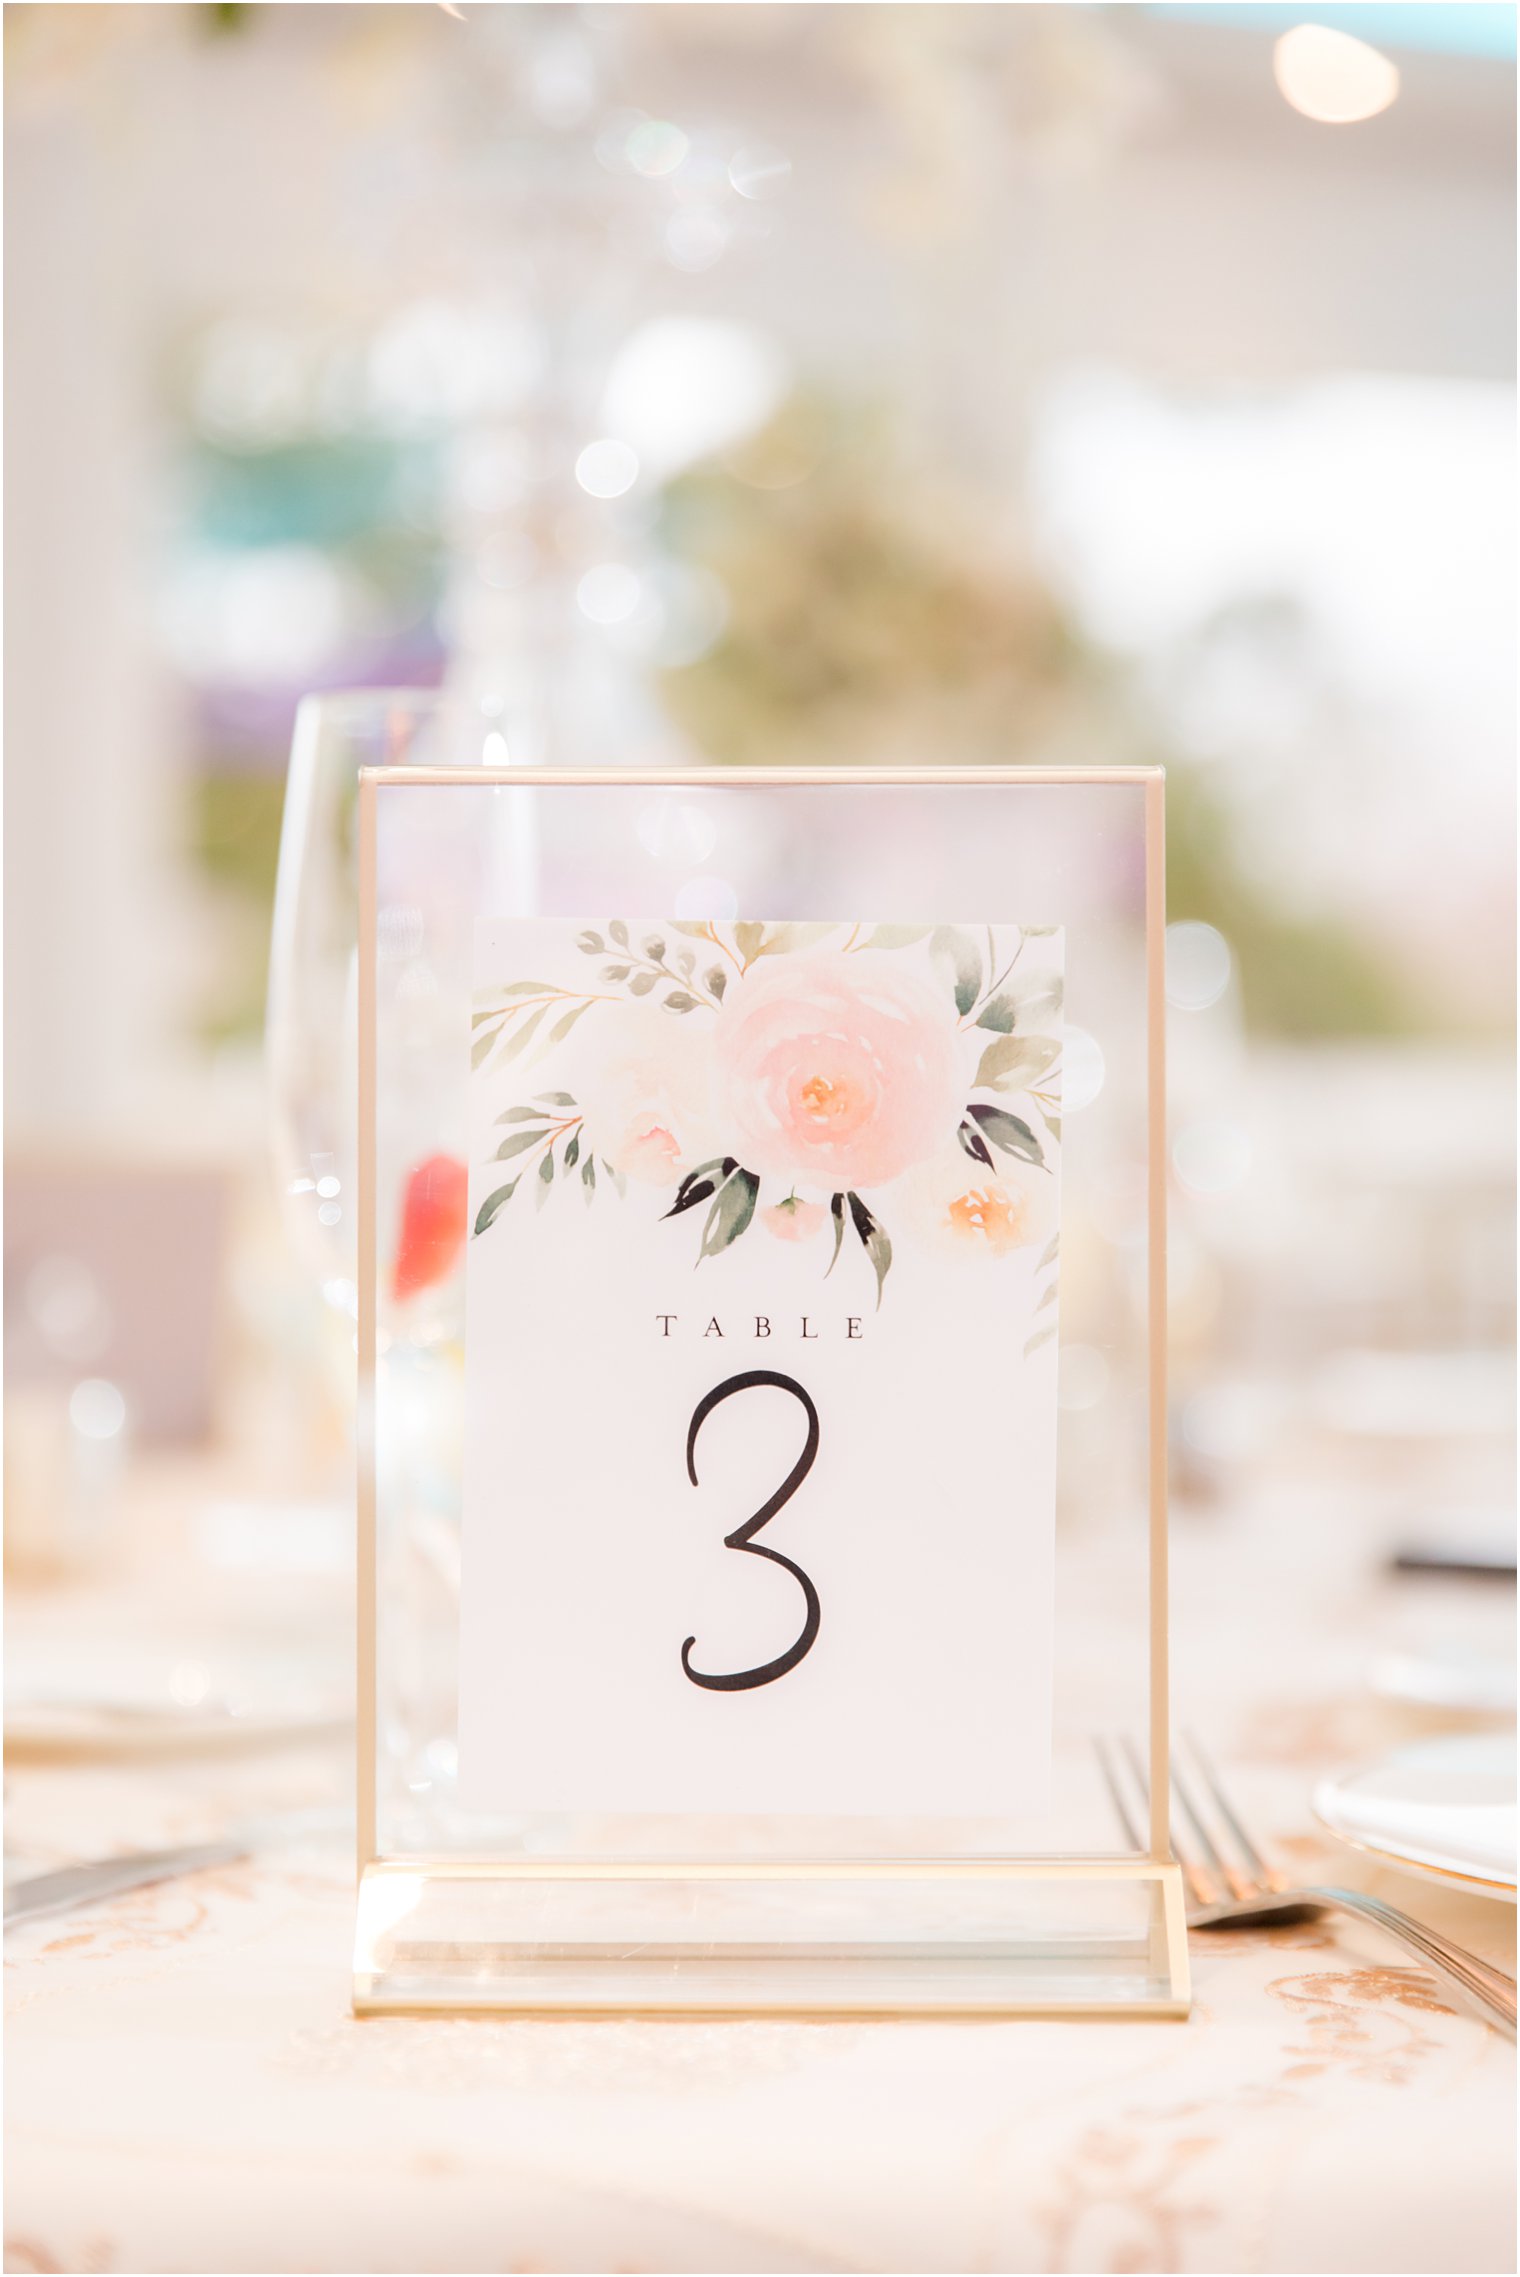 Shabby chic table number idea